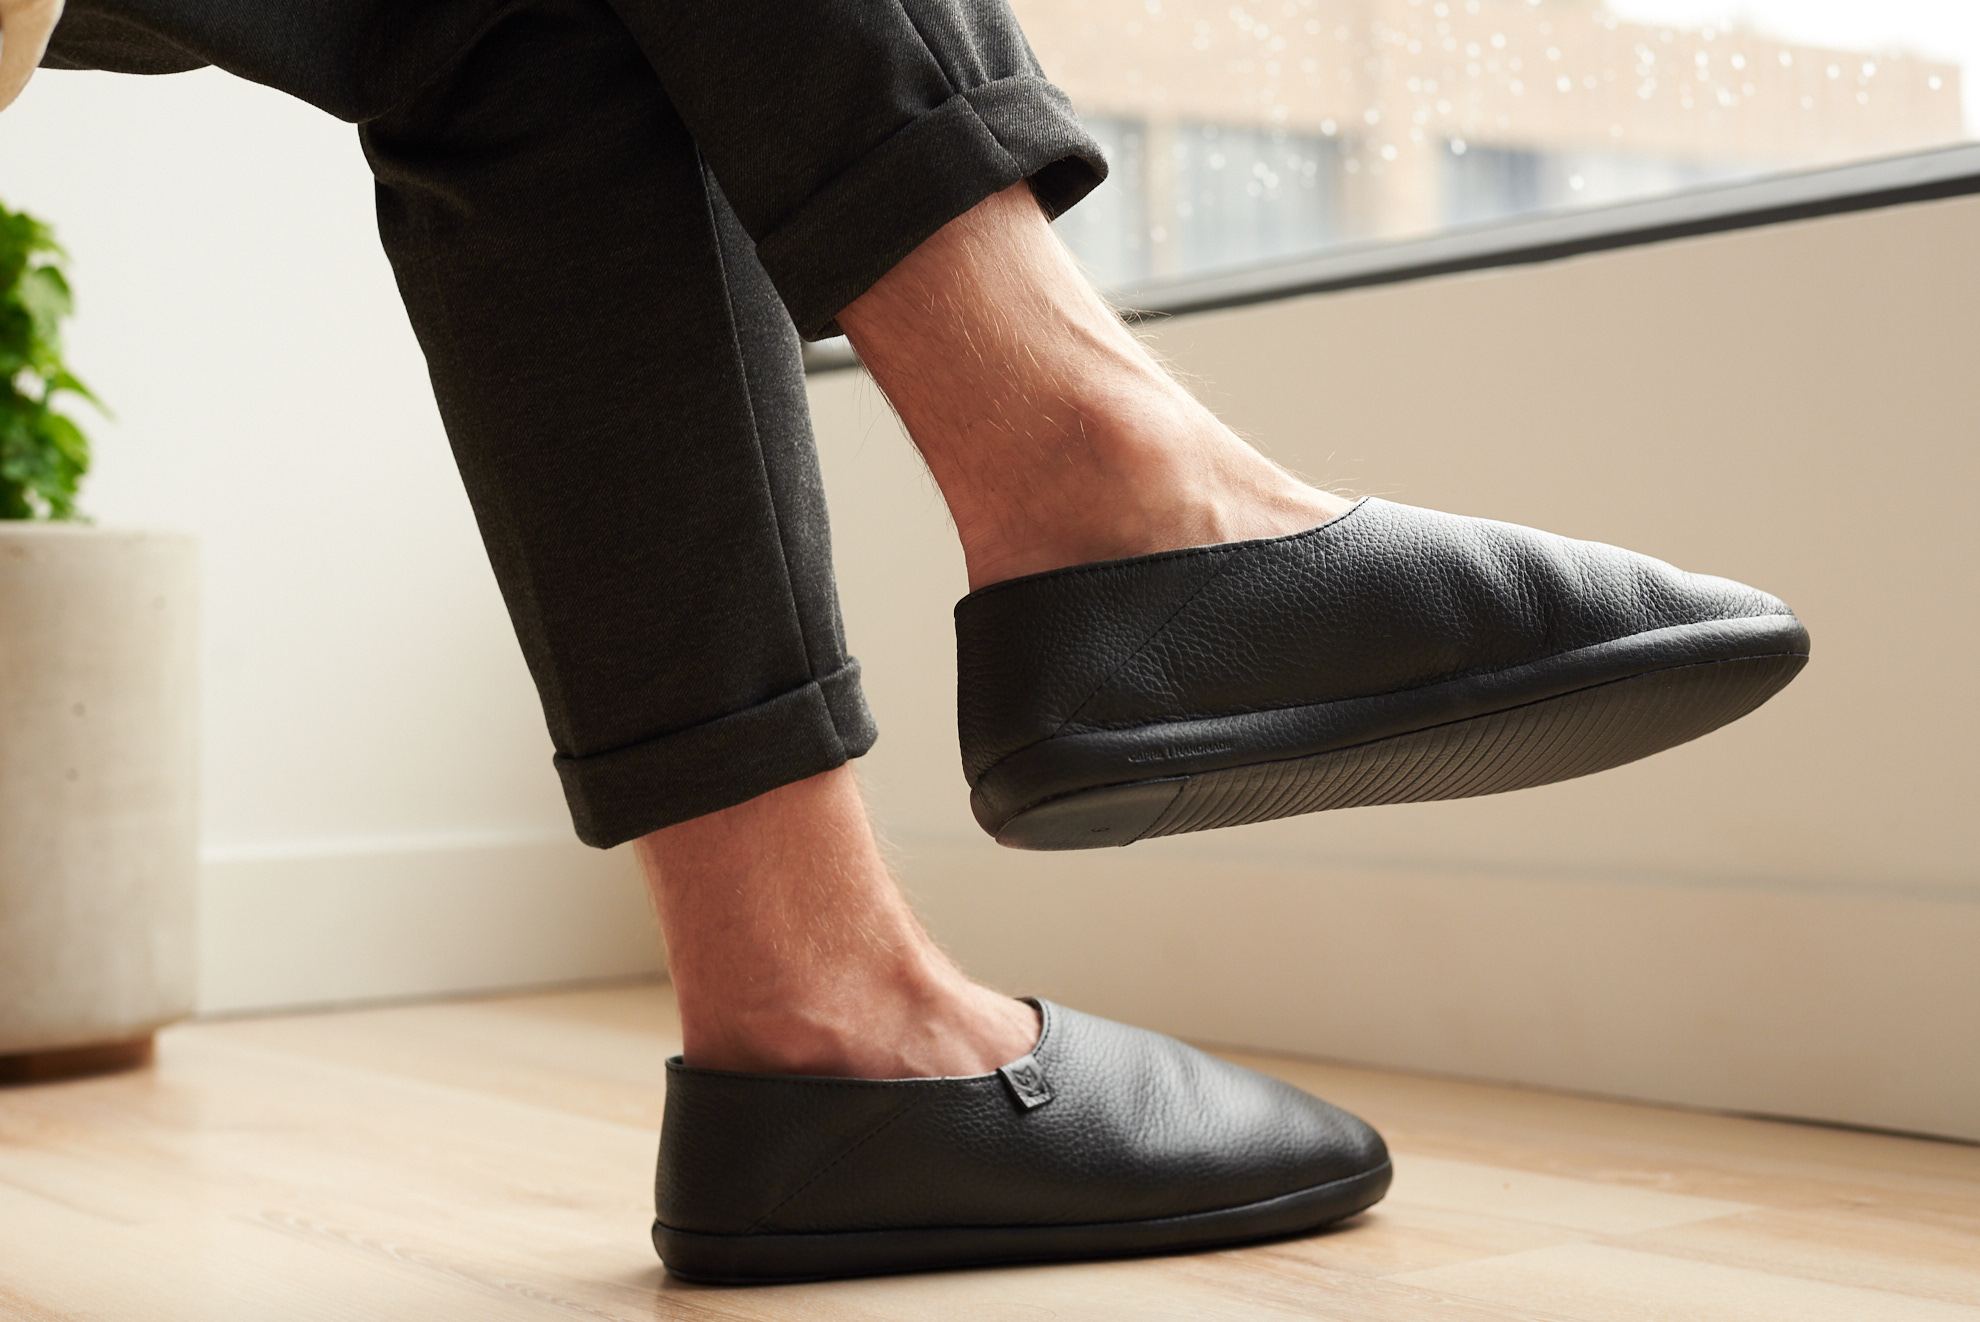 Black home shoes. Full grain leather